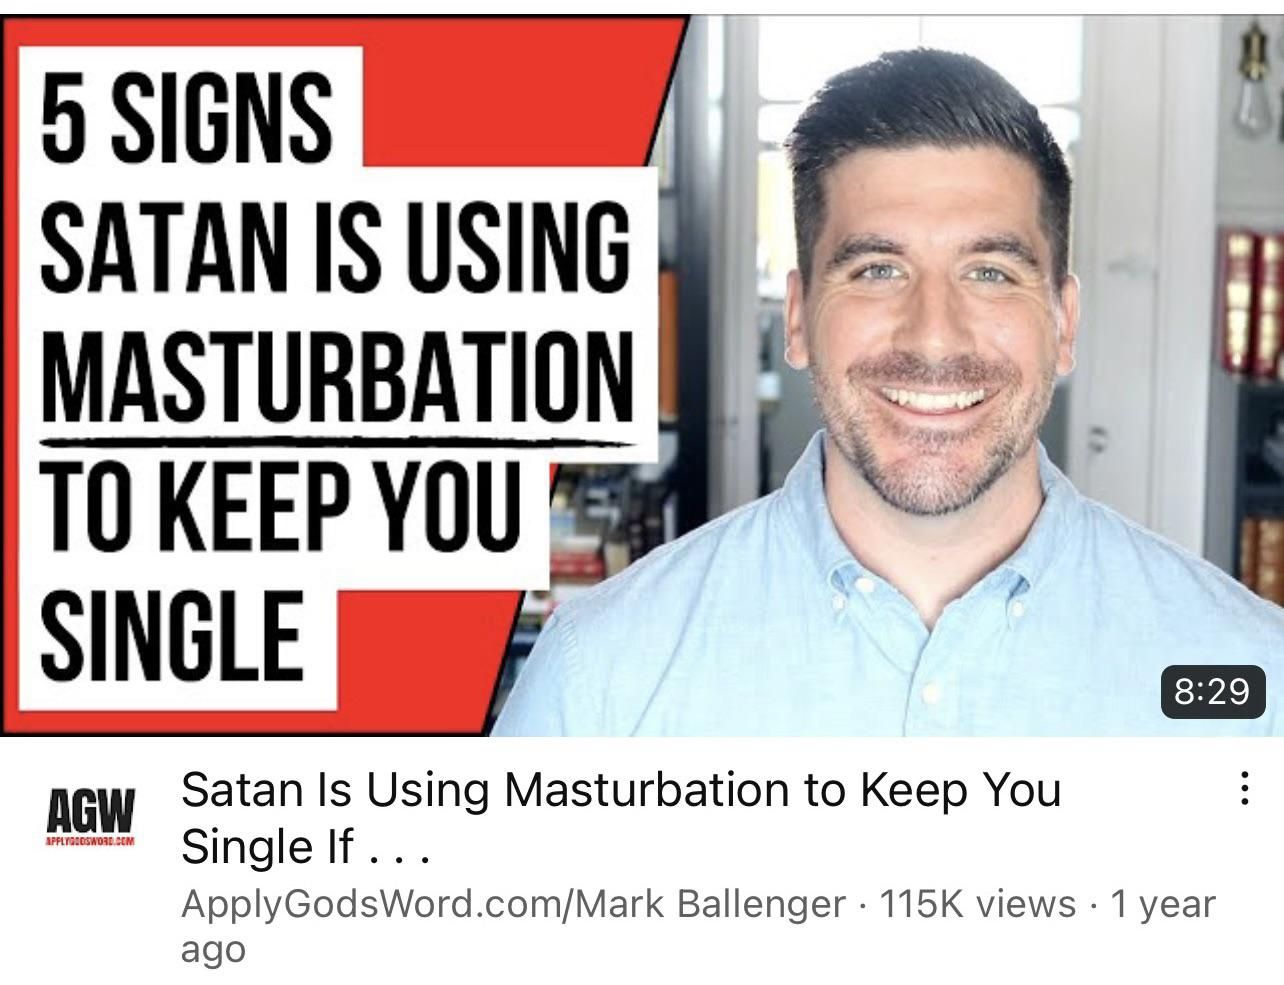 Honestly wasn’t sure where to post this but opened YouTube to see this bizarre ad. IDK why it was suggested for me but I burst out laughing upon seeing it